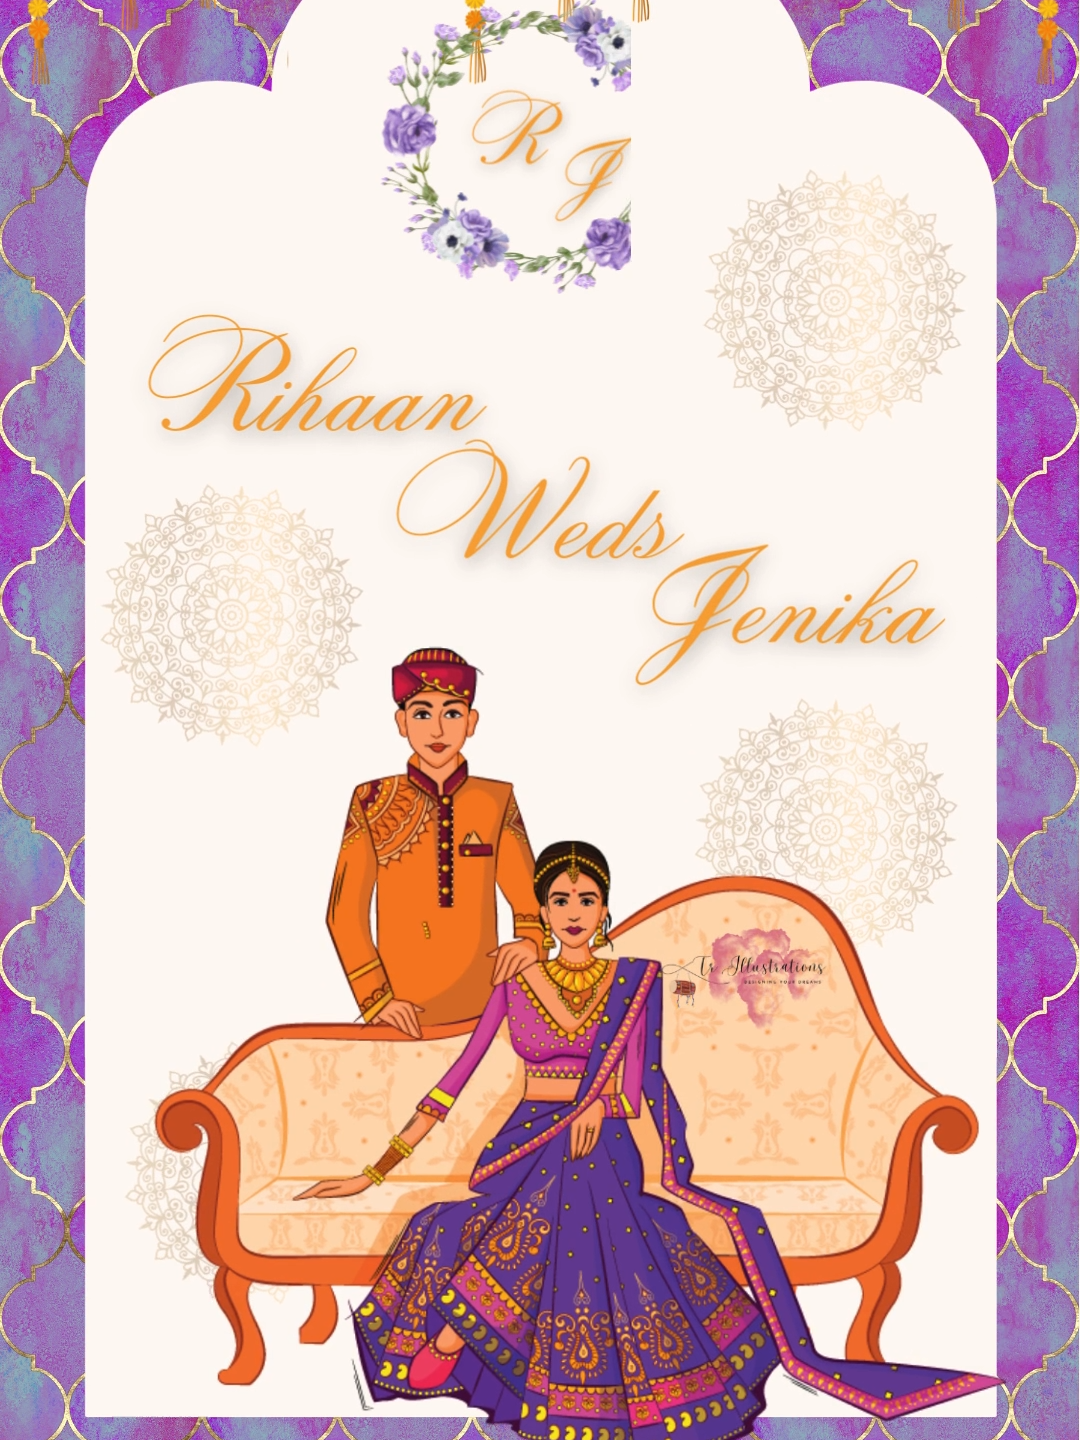 Pick your favourite colour theme for your Indian wedding digital invitation in place of the purple background, with options ranging from blue, pink, mink, green, and beautiful combinations of mentioned shades. #digitalinvitation  #weddingtiktok  #weddinginvitations  #einvites  #layoutdesign  #togetherneyo  #purplethemedaesthethic